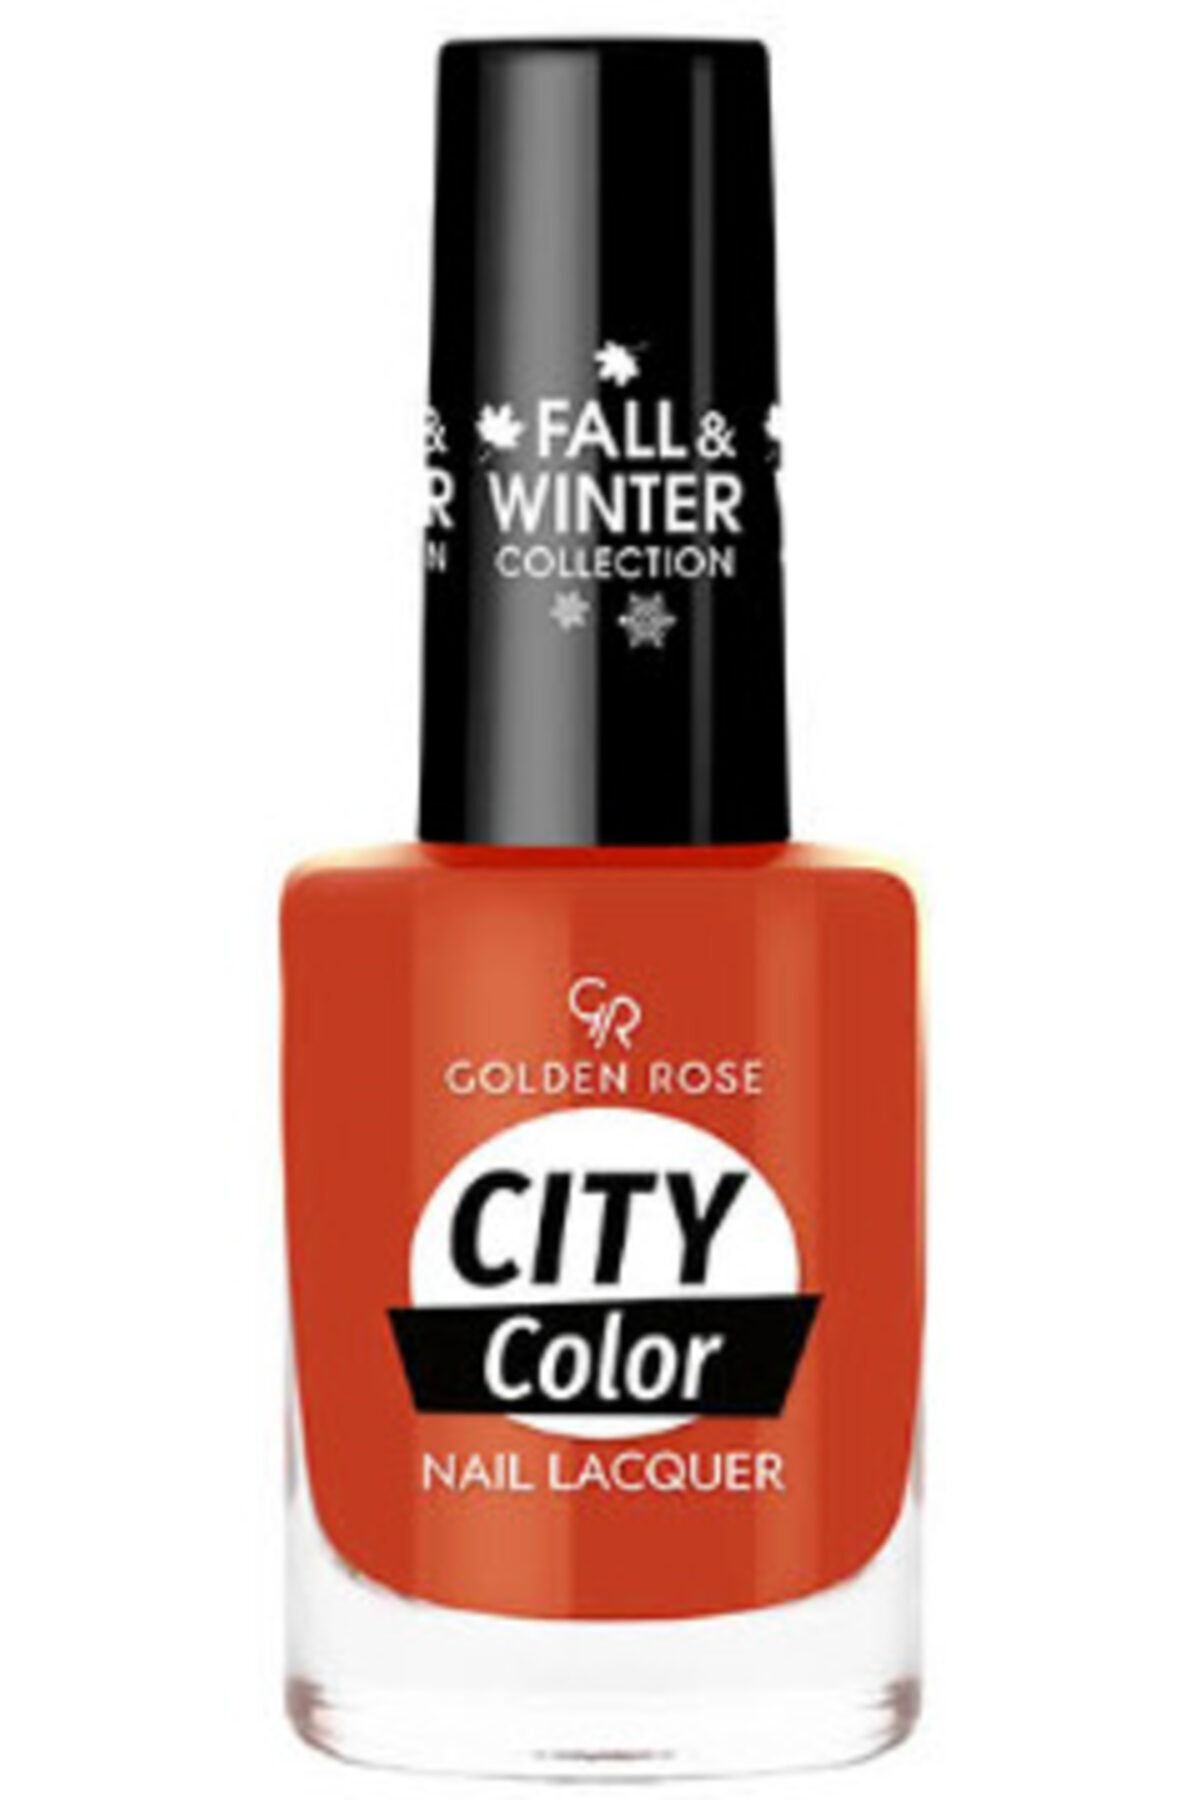 Golden Rose City Color Fall&winter Collection No:311